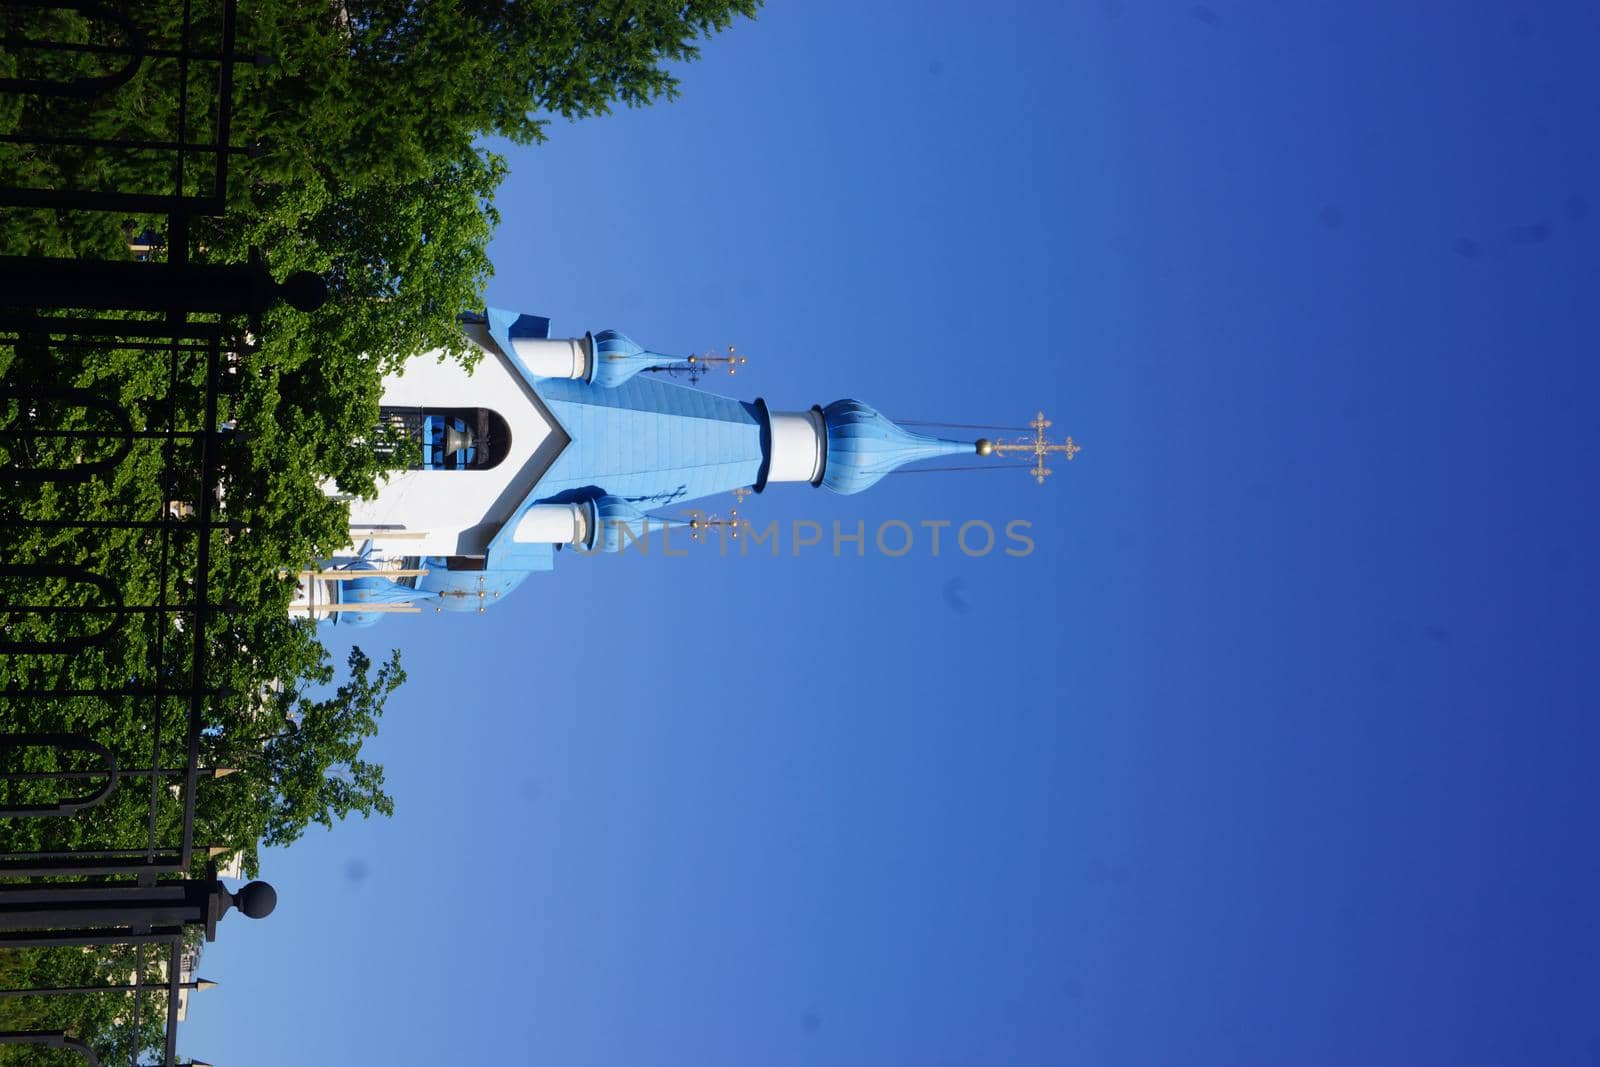 Old church Steeple spire and chimney tops against blue sky by kajasja